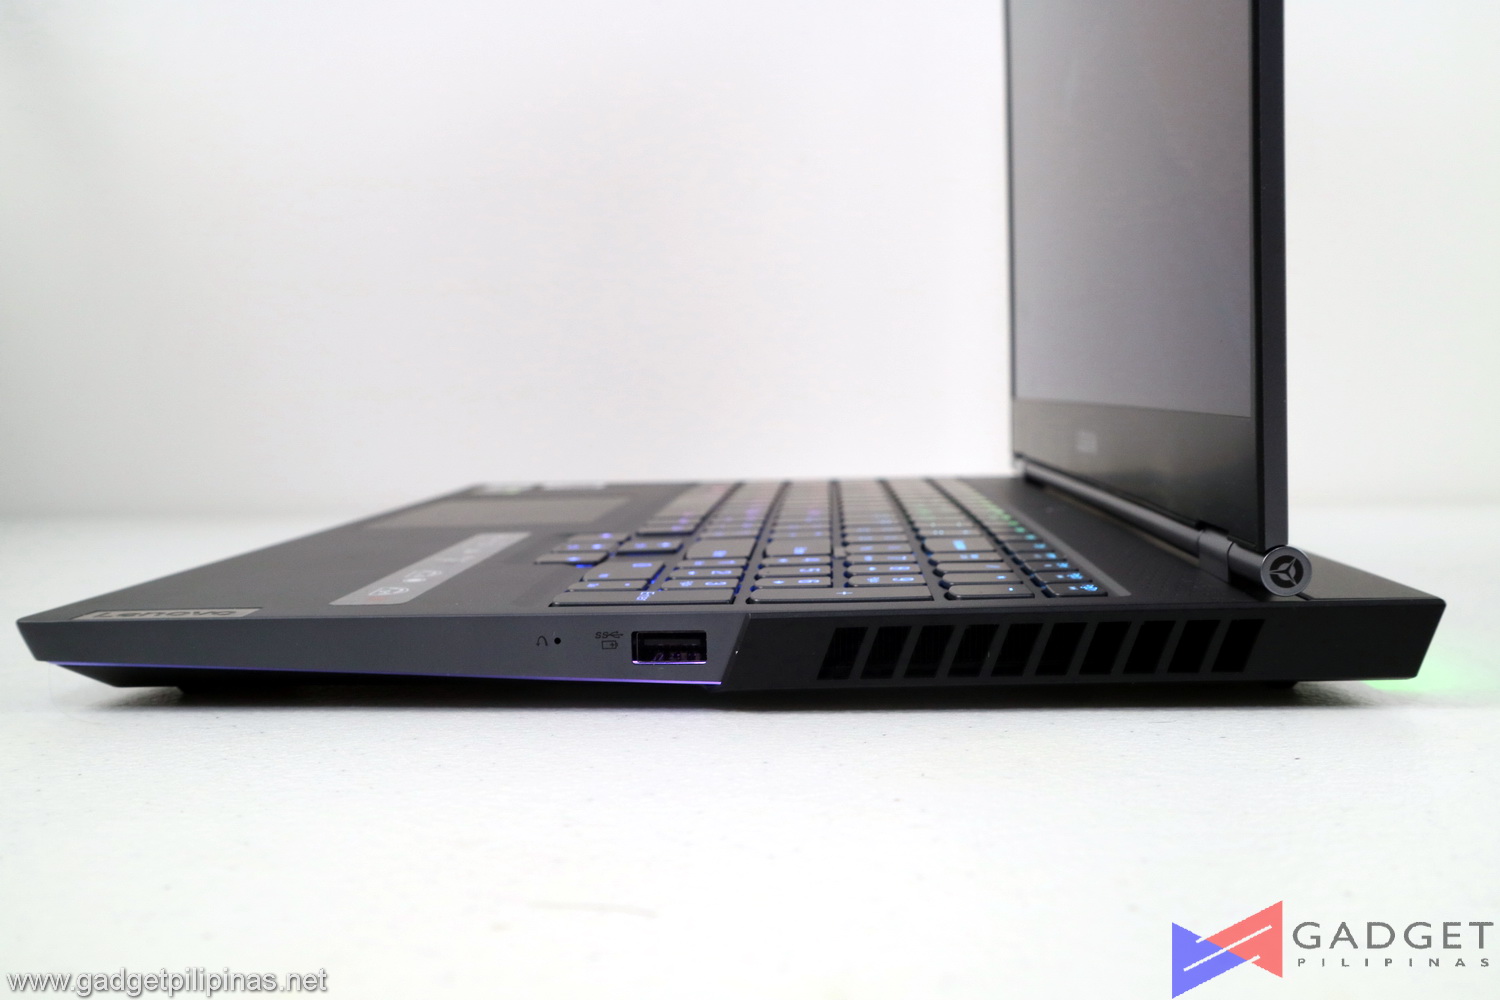 Lenovo Legion 7i Review - The Thin and Light Gaming Laptop To Beat For 2020